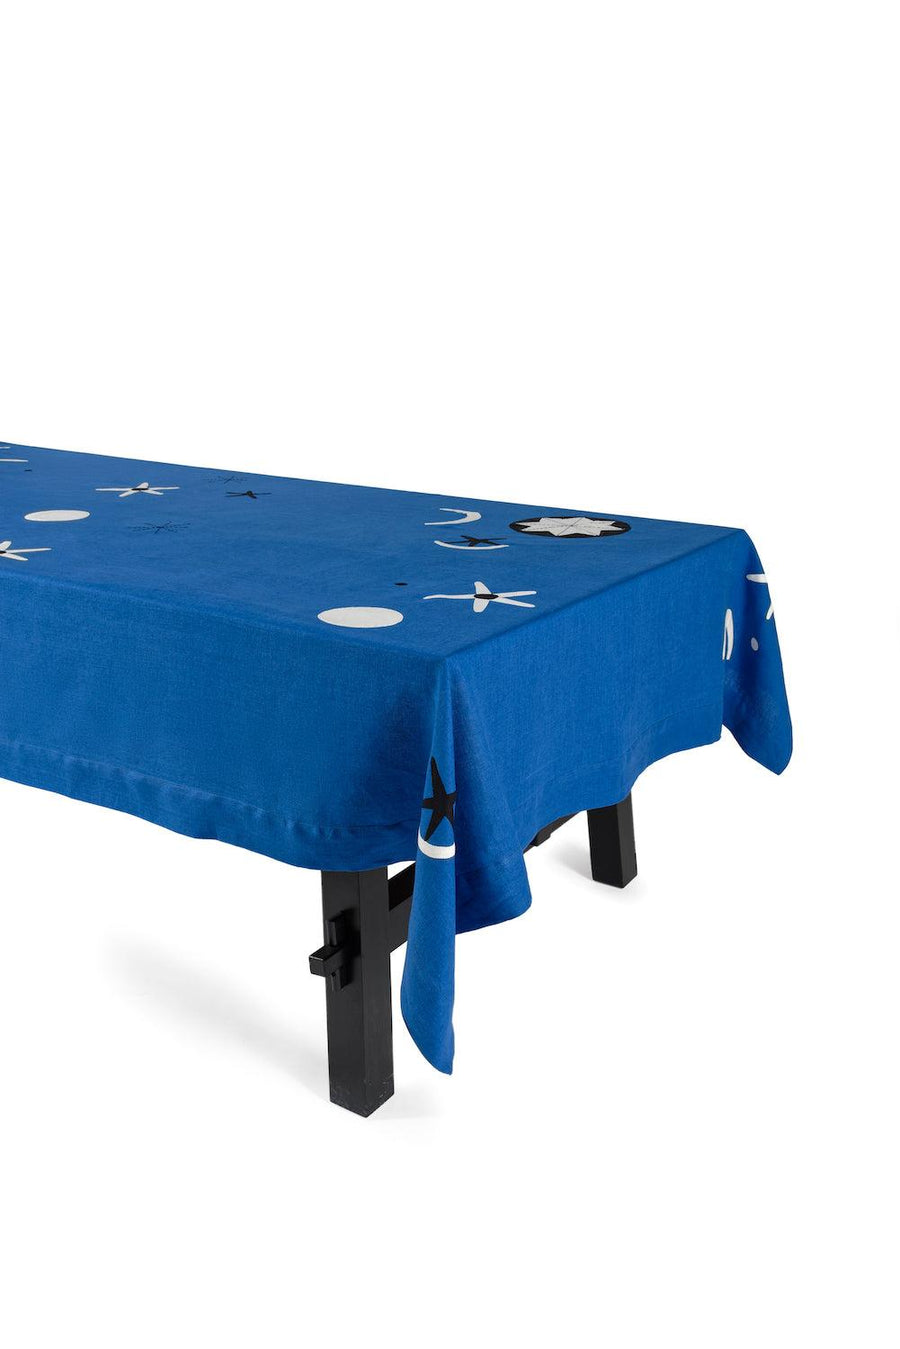 Cosmic Tablecloth Blue